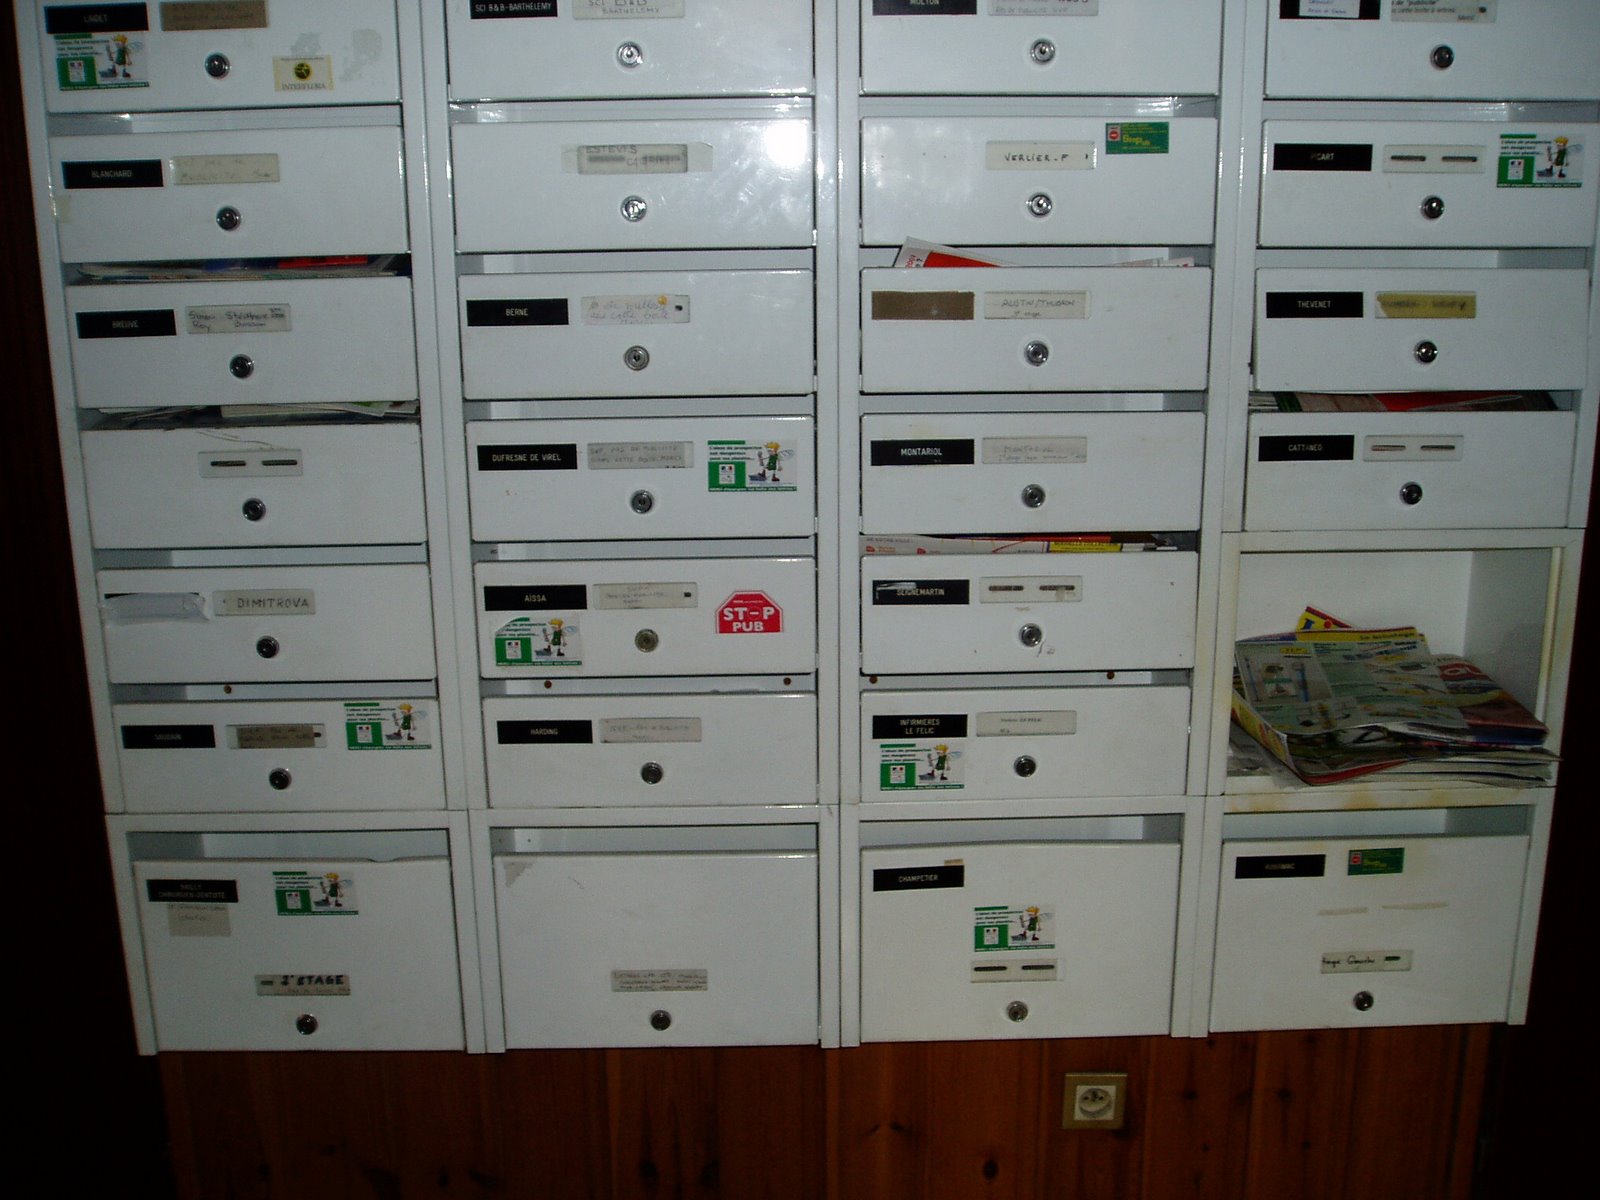 [postboxes.jpg]